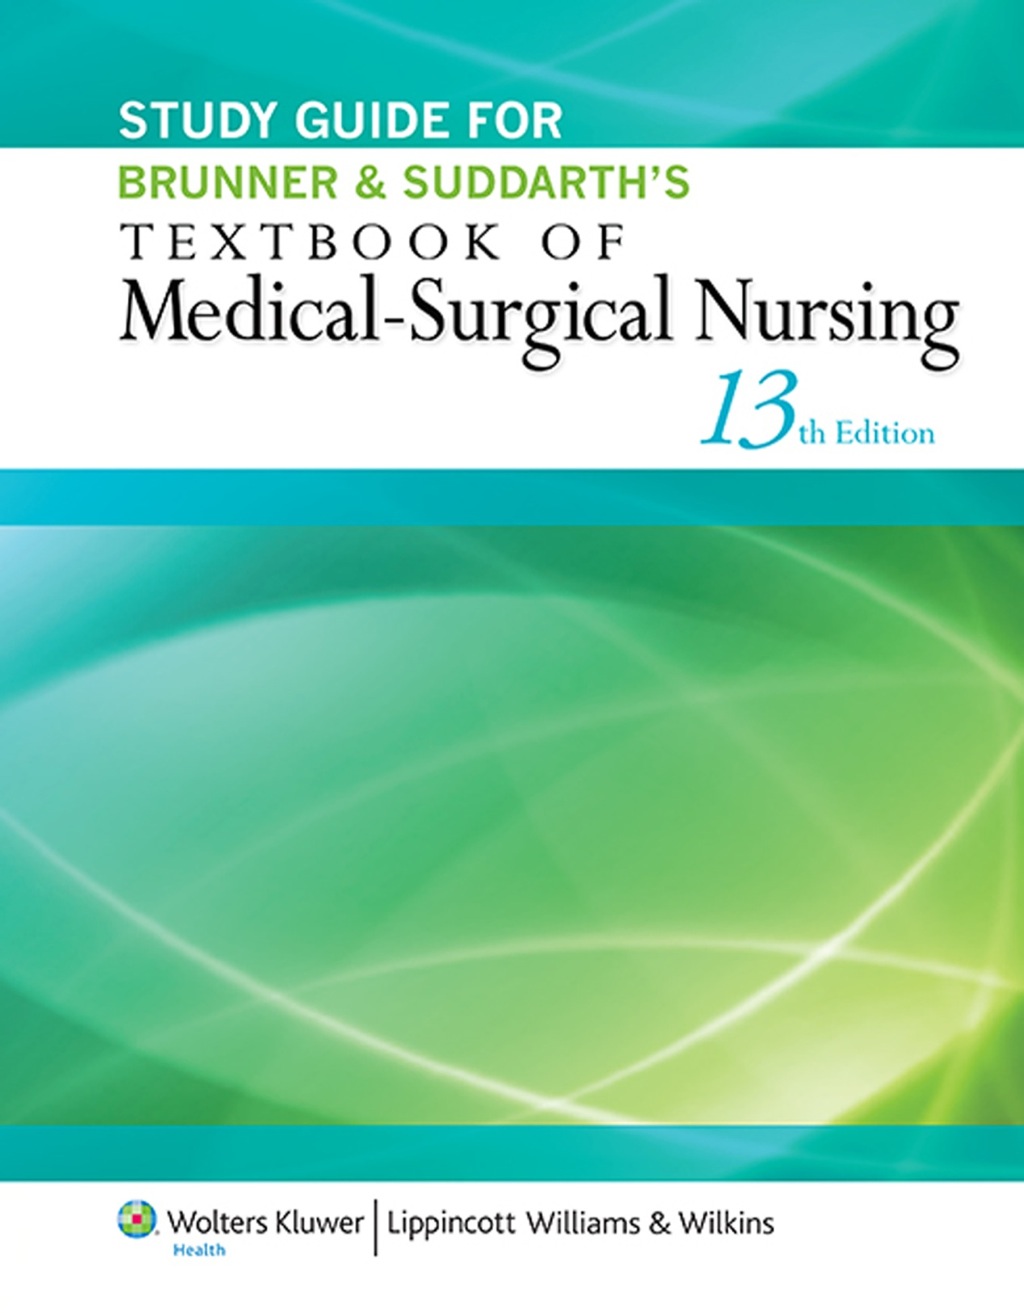 Study Guide for Brunner & Suddarth's Textbook of Medical-Surgical Nursing - 13th Edition (eBook)